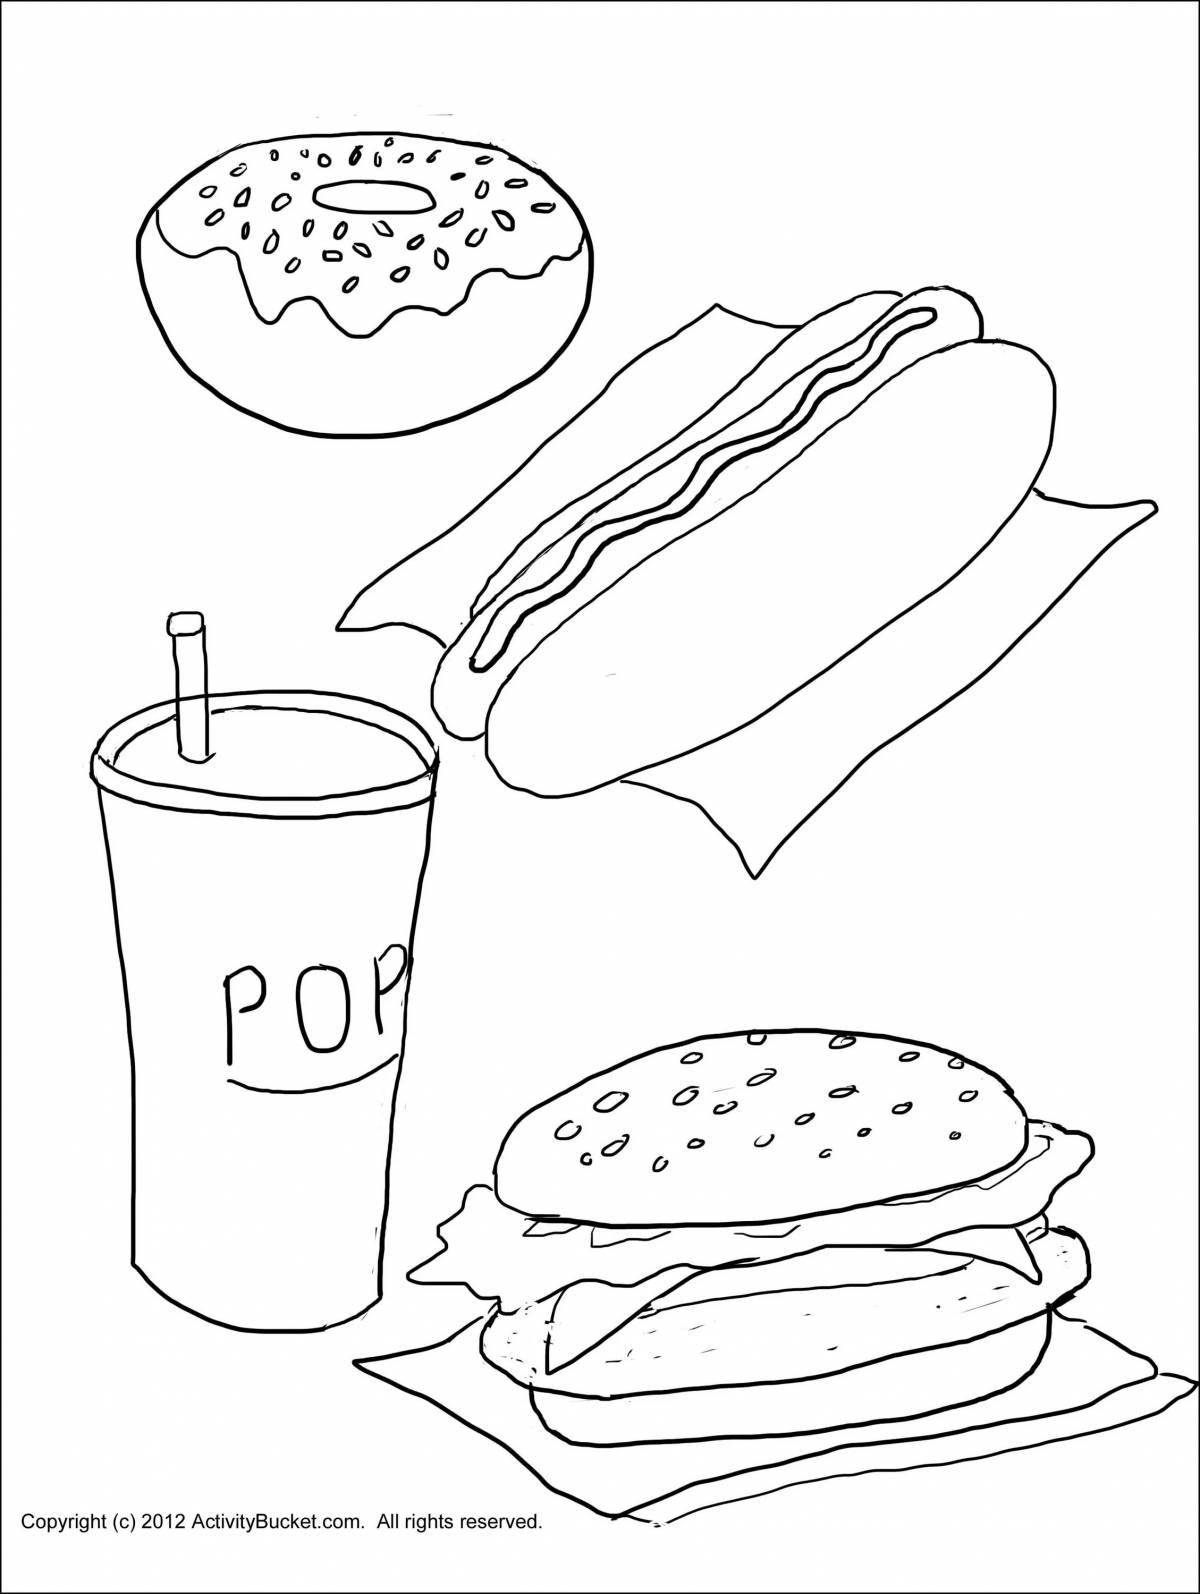 Adorable junk food coloring page